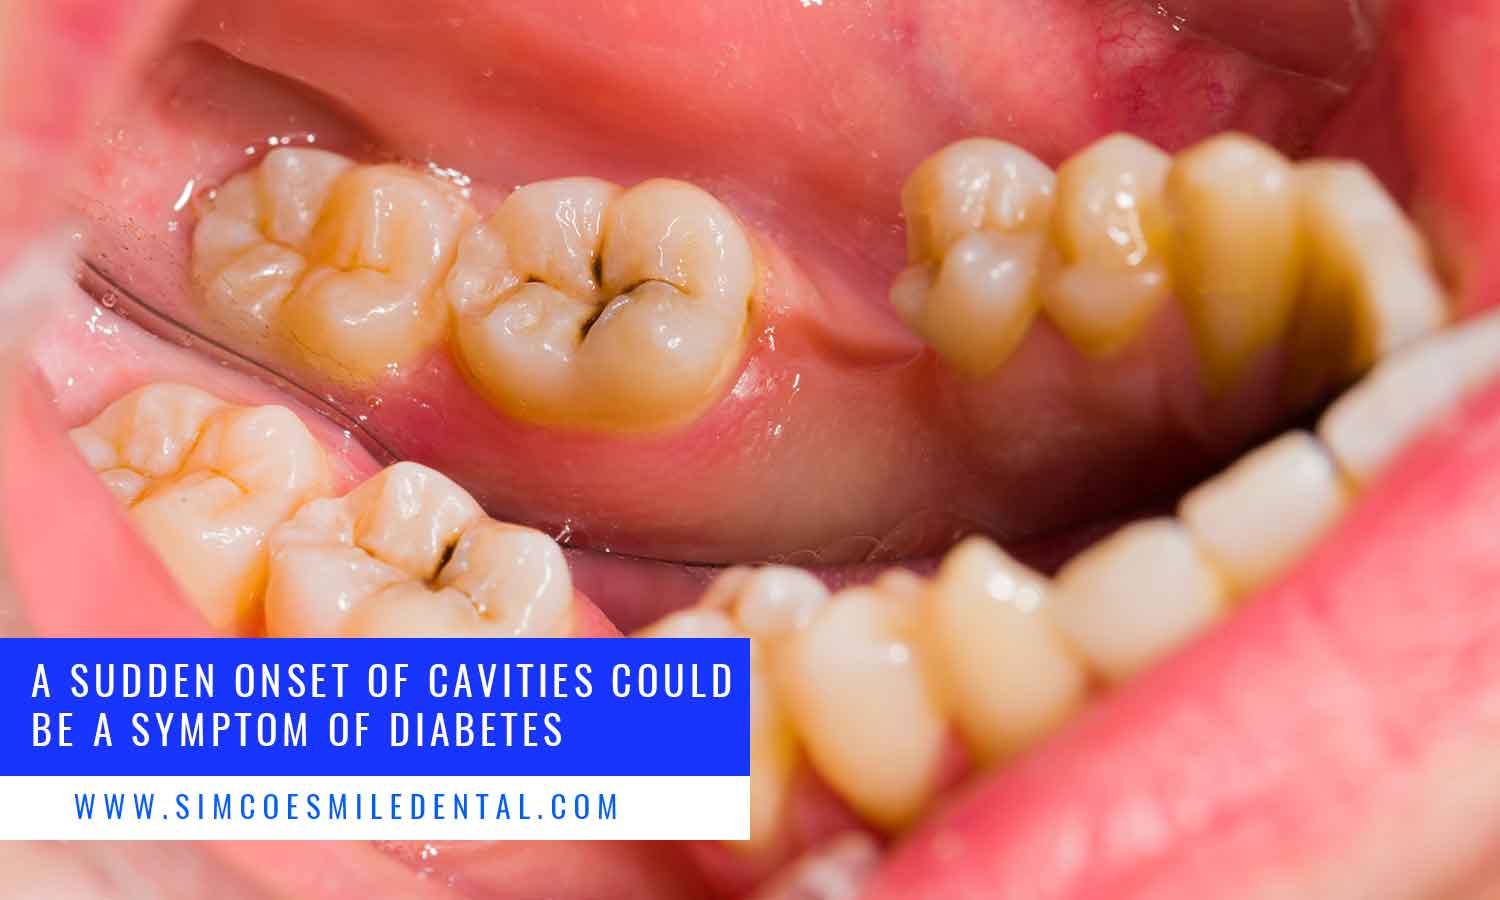 A sudden onset of cavities could be a symptom of diabetes.